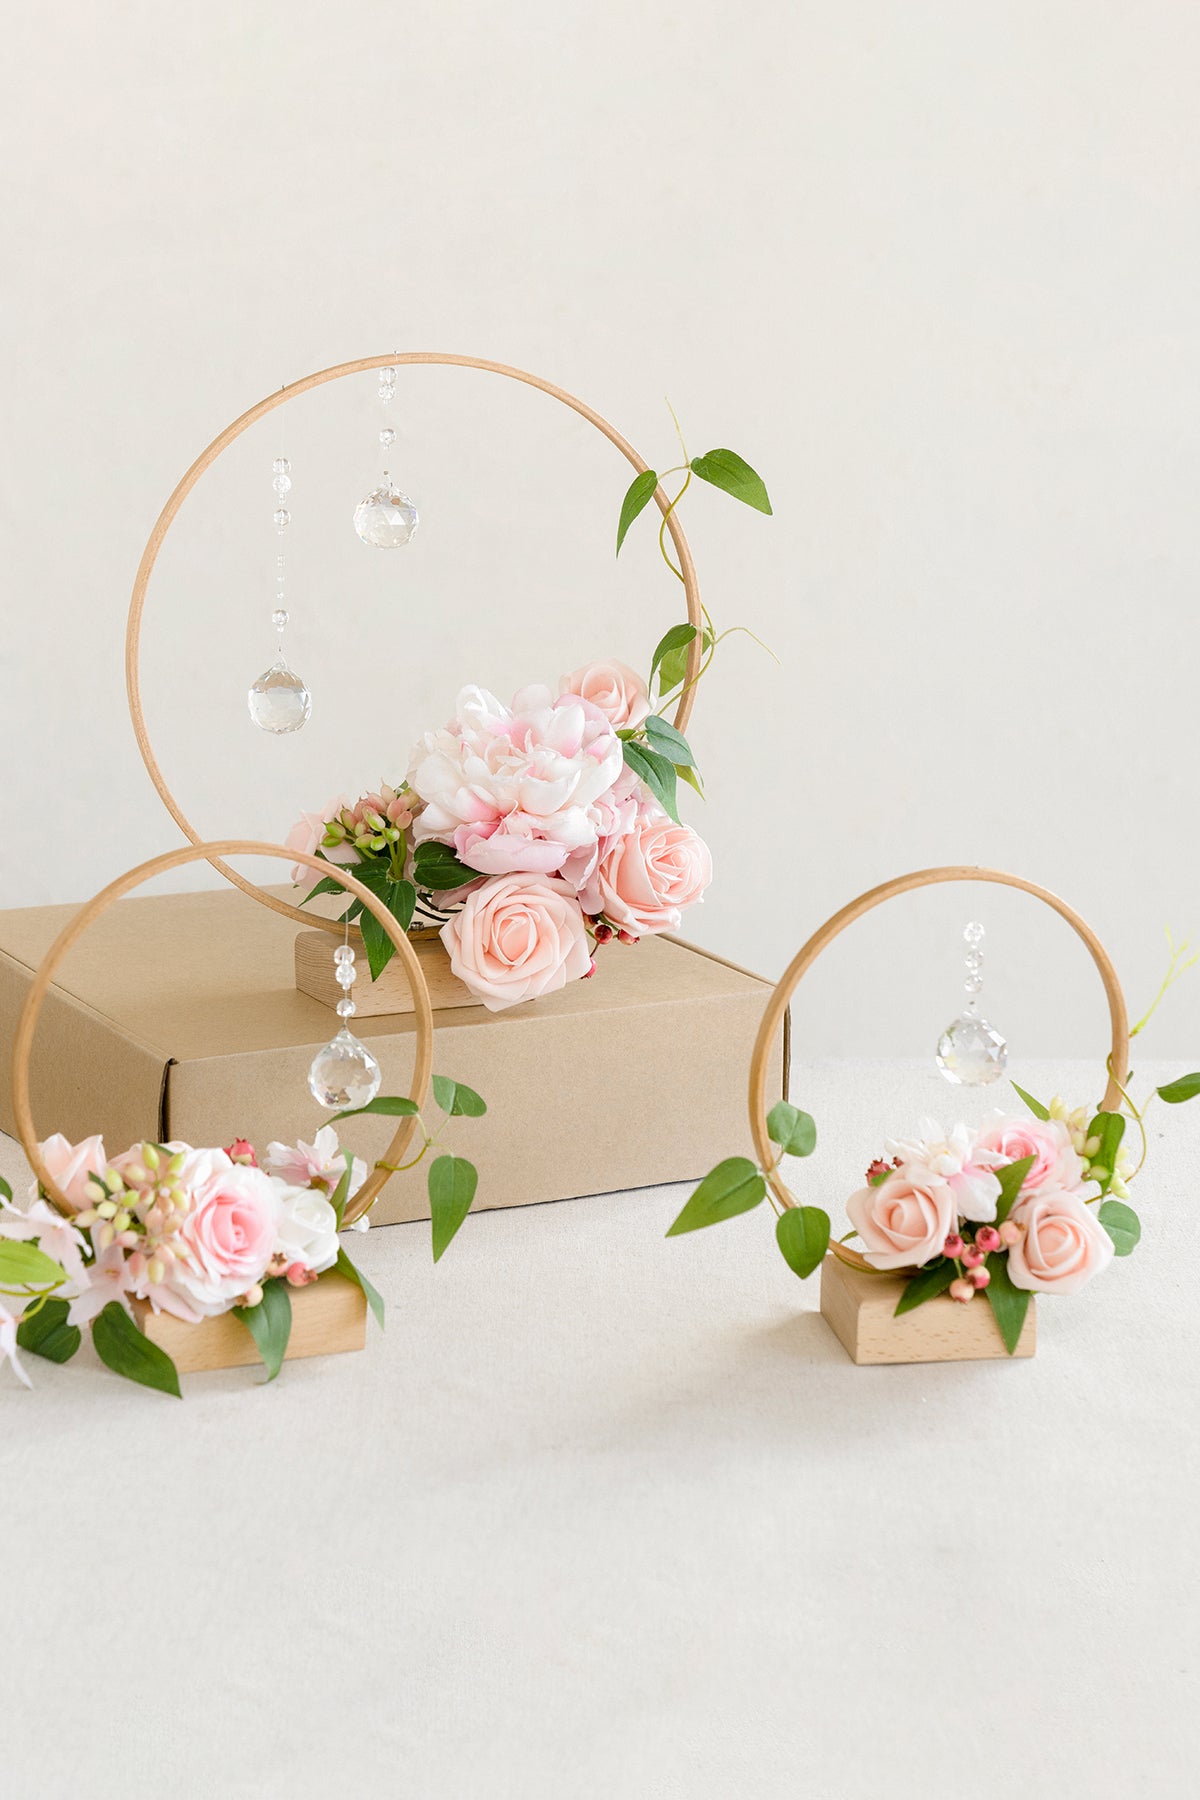 Wedding Centerpieces  DIY Wood Centerpiece Kits (Set of 3) - with Crystal  – Ling's Moment